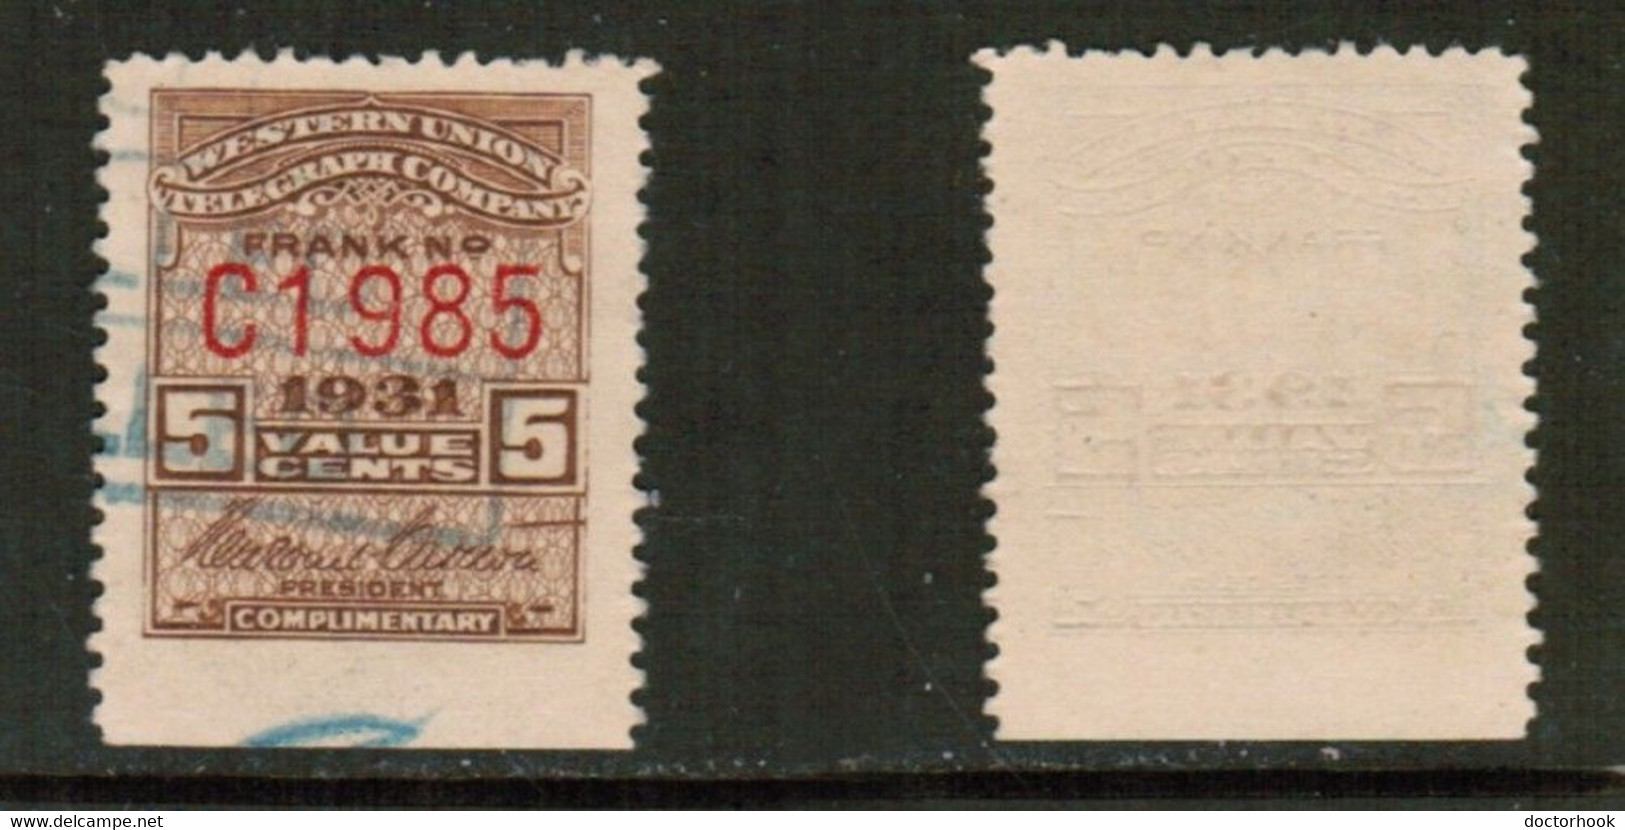 U.S.A.  1931---5 CENT WESTERN UNION TELEGRAPH STAMP USED (CONDITION AS PER SCAN) (Stamp Scan # 839-15) - Telegrafo